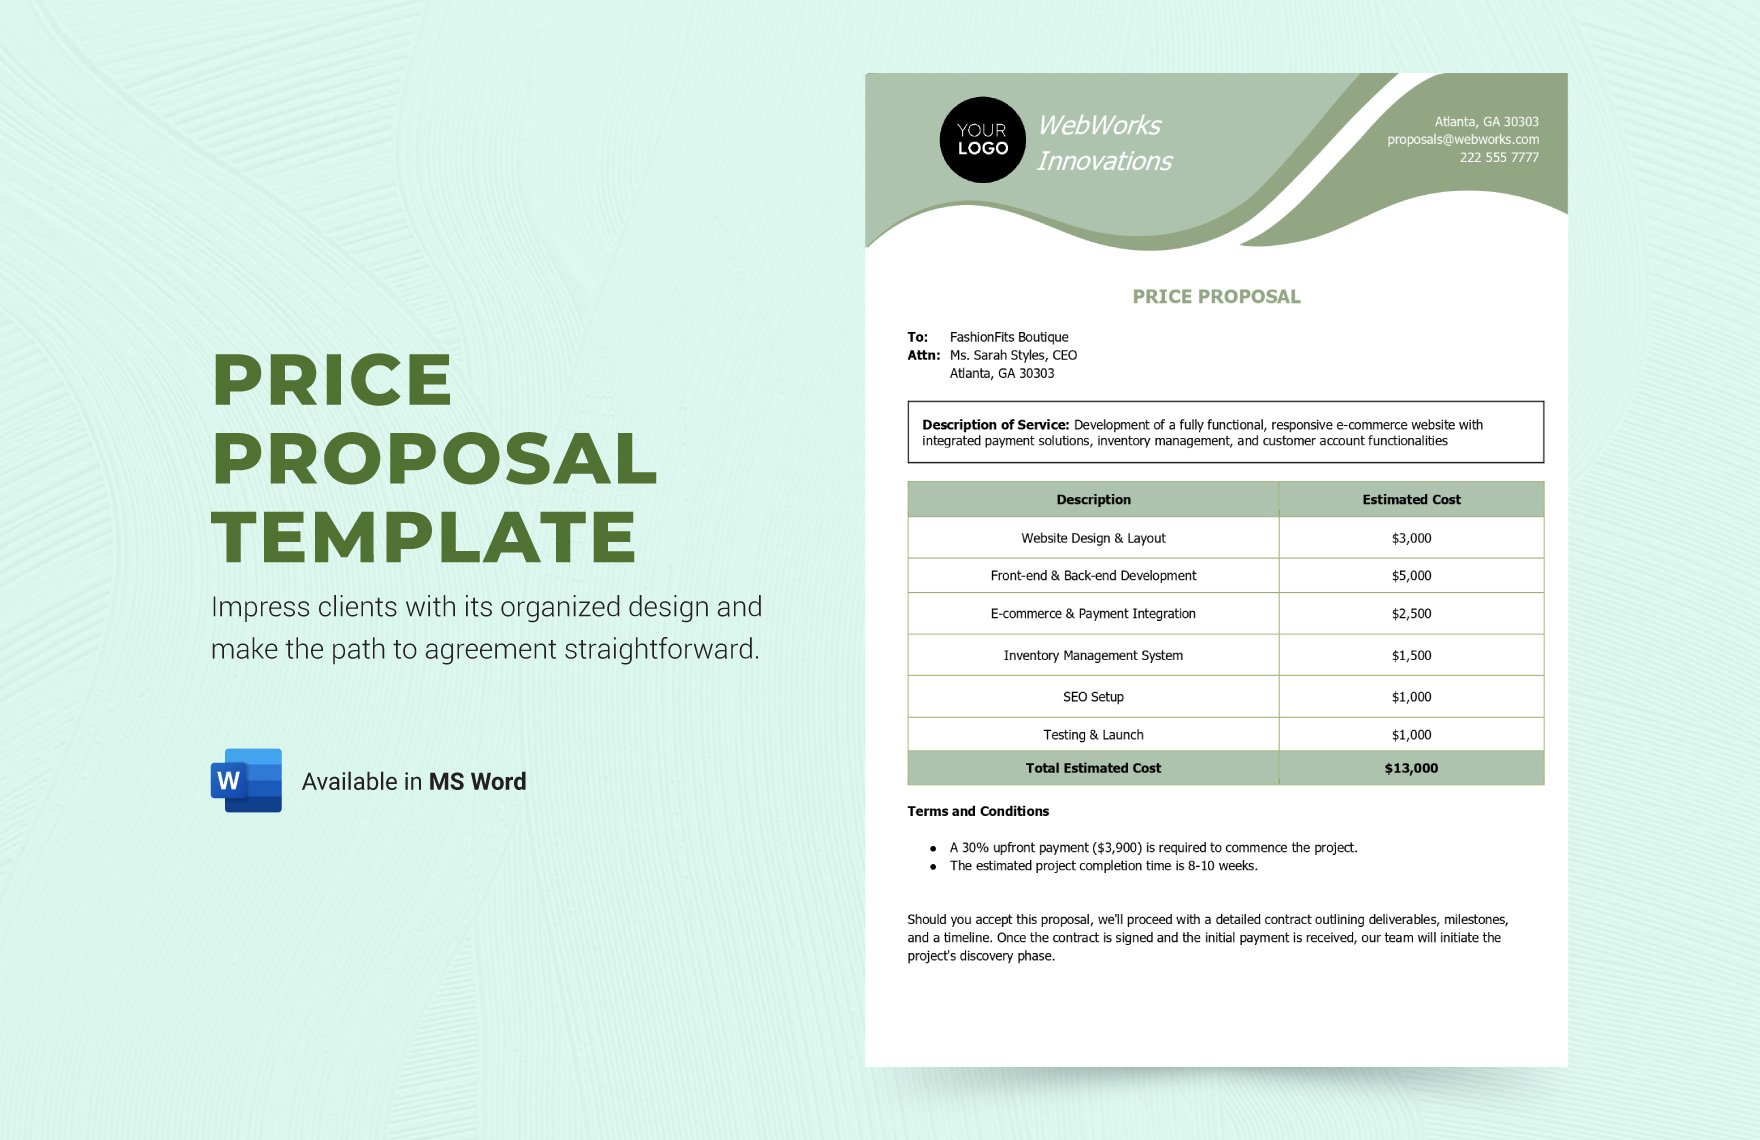 Price Proposal Template in Word